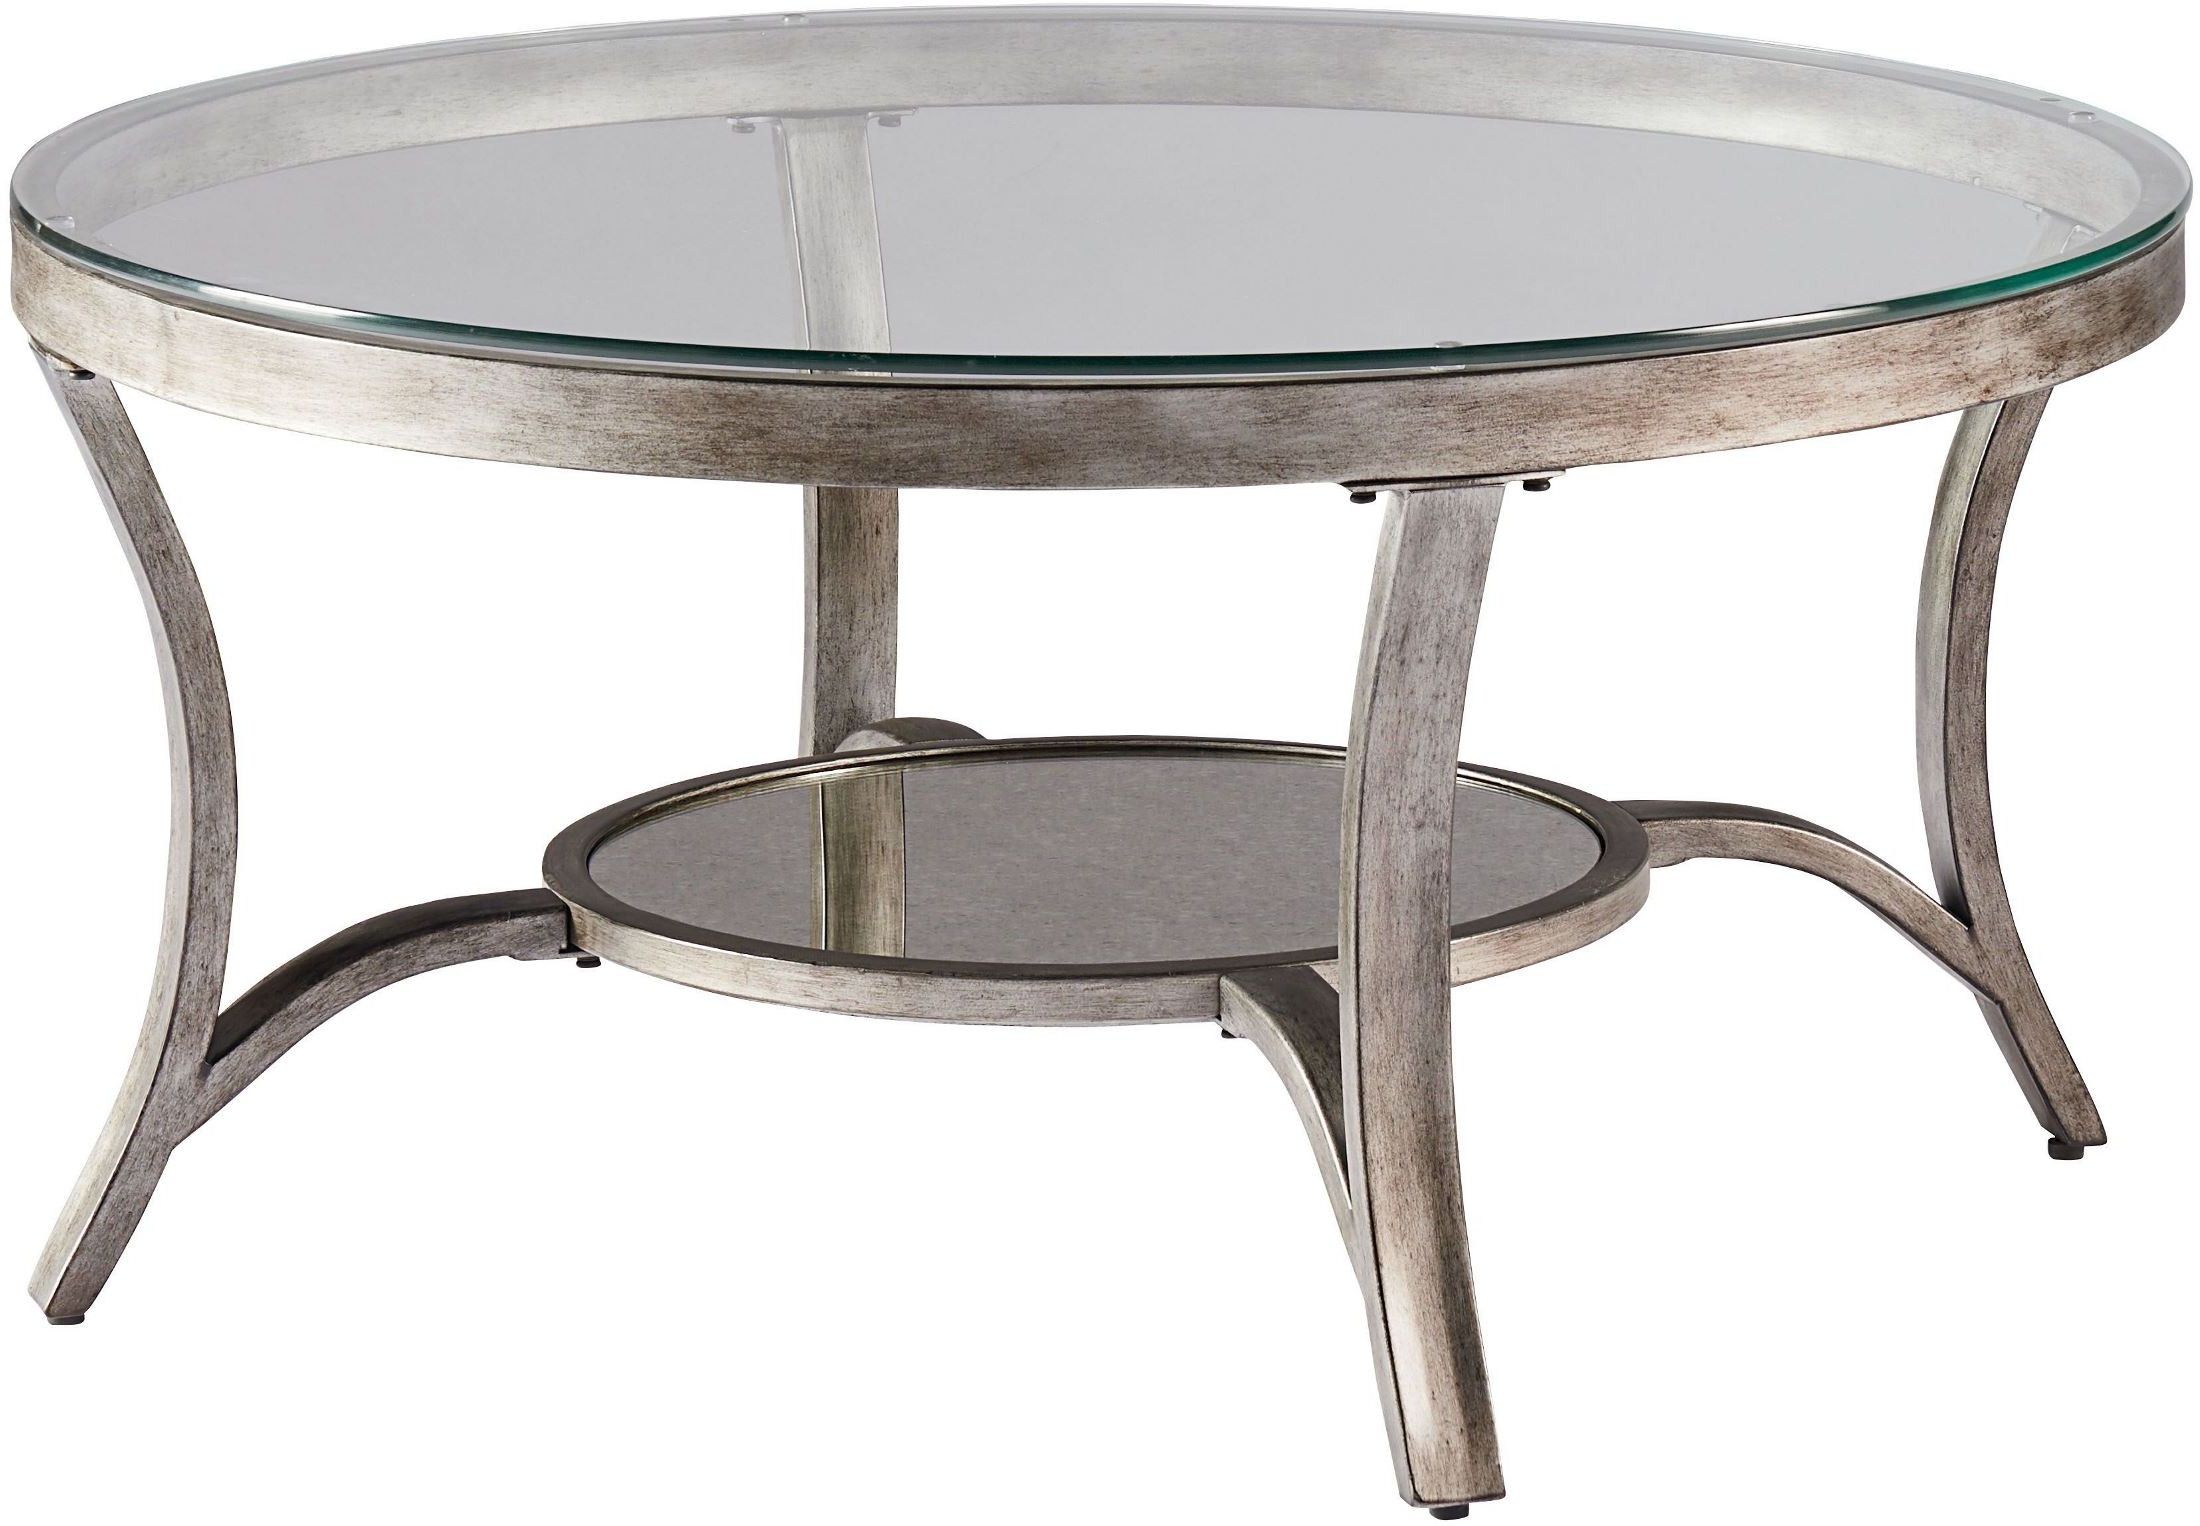 Widely Used Metallic Silver Cocktail Tables Regarding Cole Champagne Metal Cocktail Table From Standard (Gallery 10 of 20)